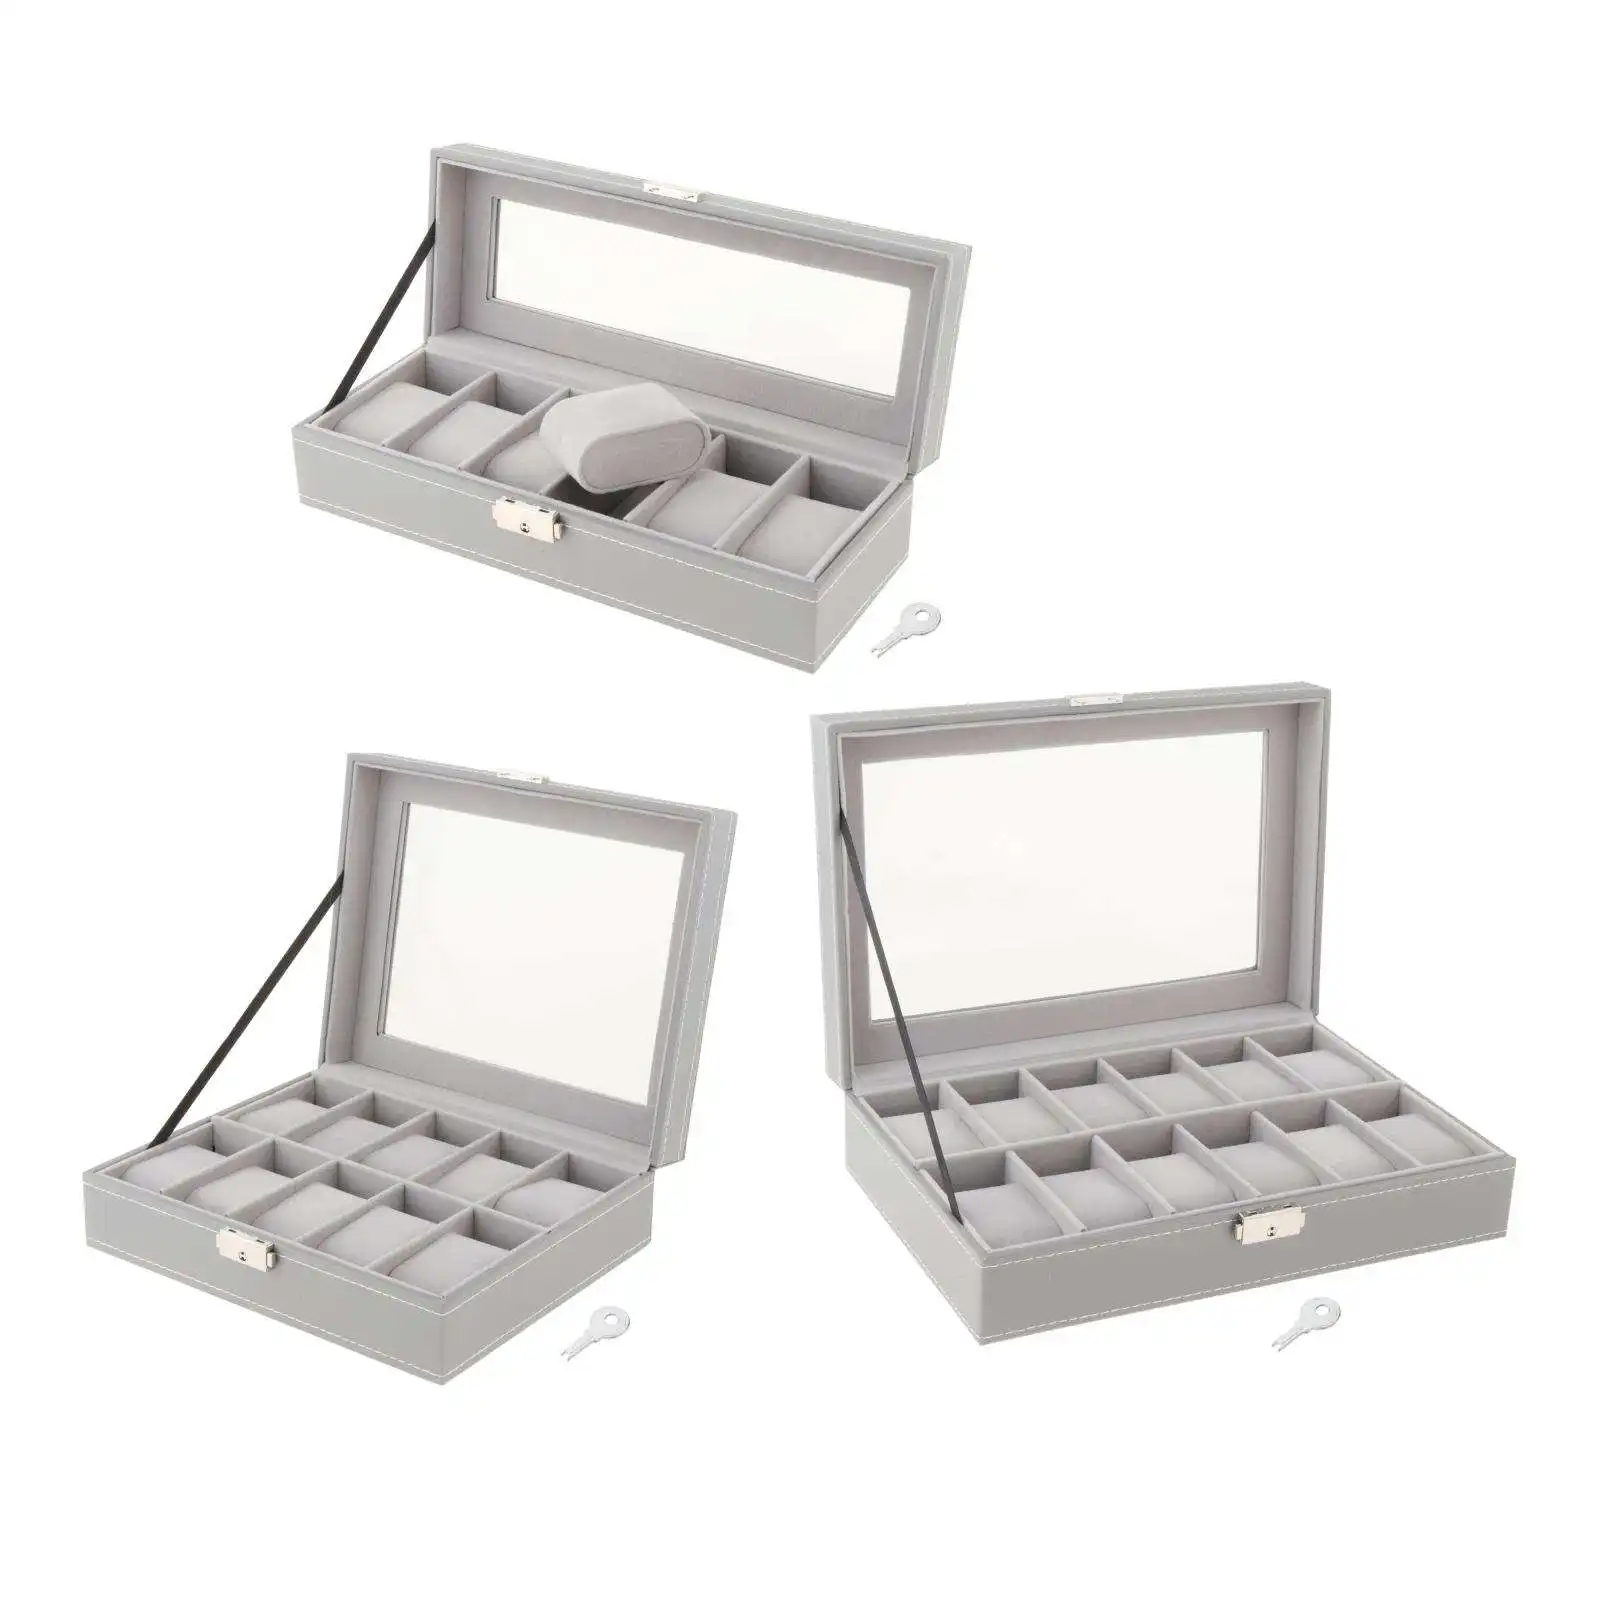 6/10/12 Watch Box PU Leather Gray Watch Case Boxes Storage Holder Organizer Jewelry Boxes Display Best Gift